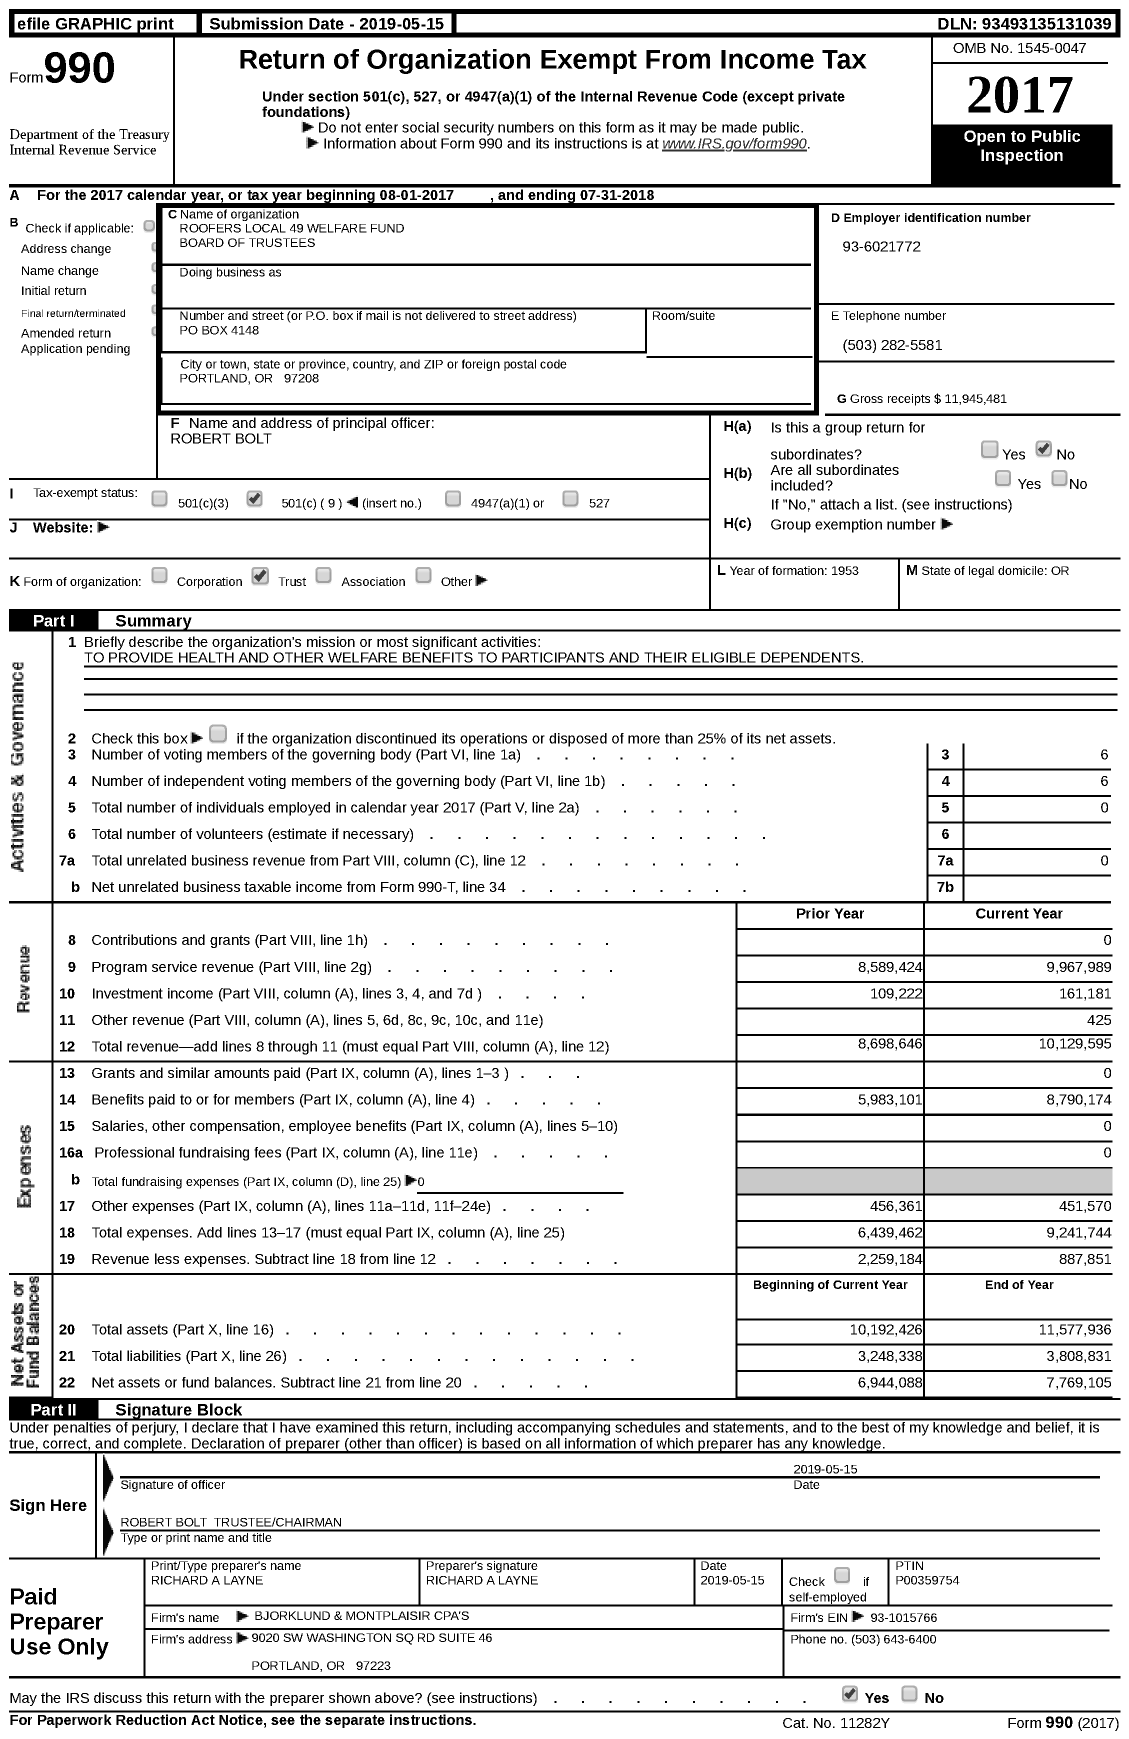 Image of first page of 2017 Form 990 for Roofers Local 49 Welfare Fund Board of Trustees